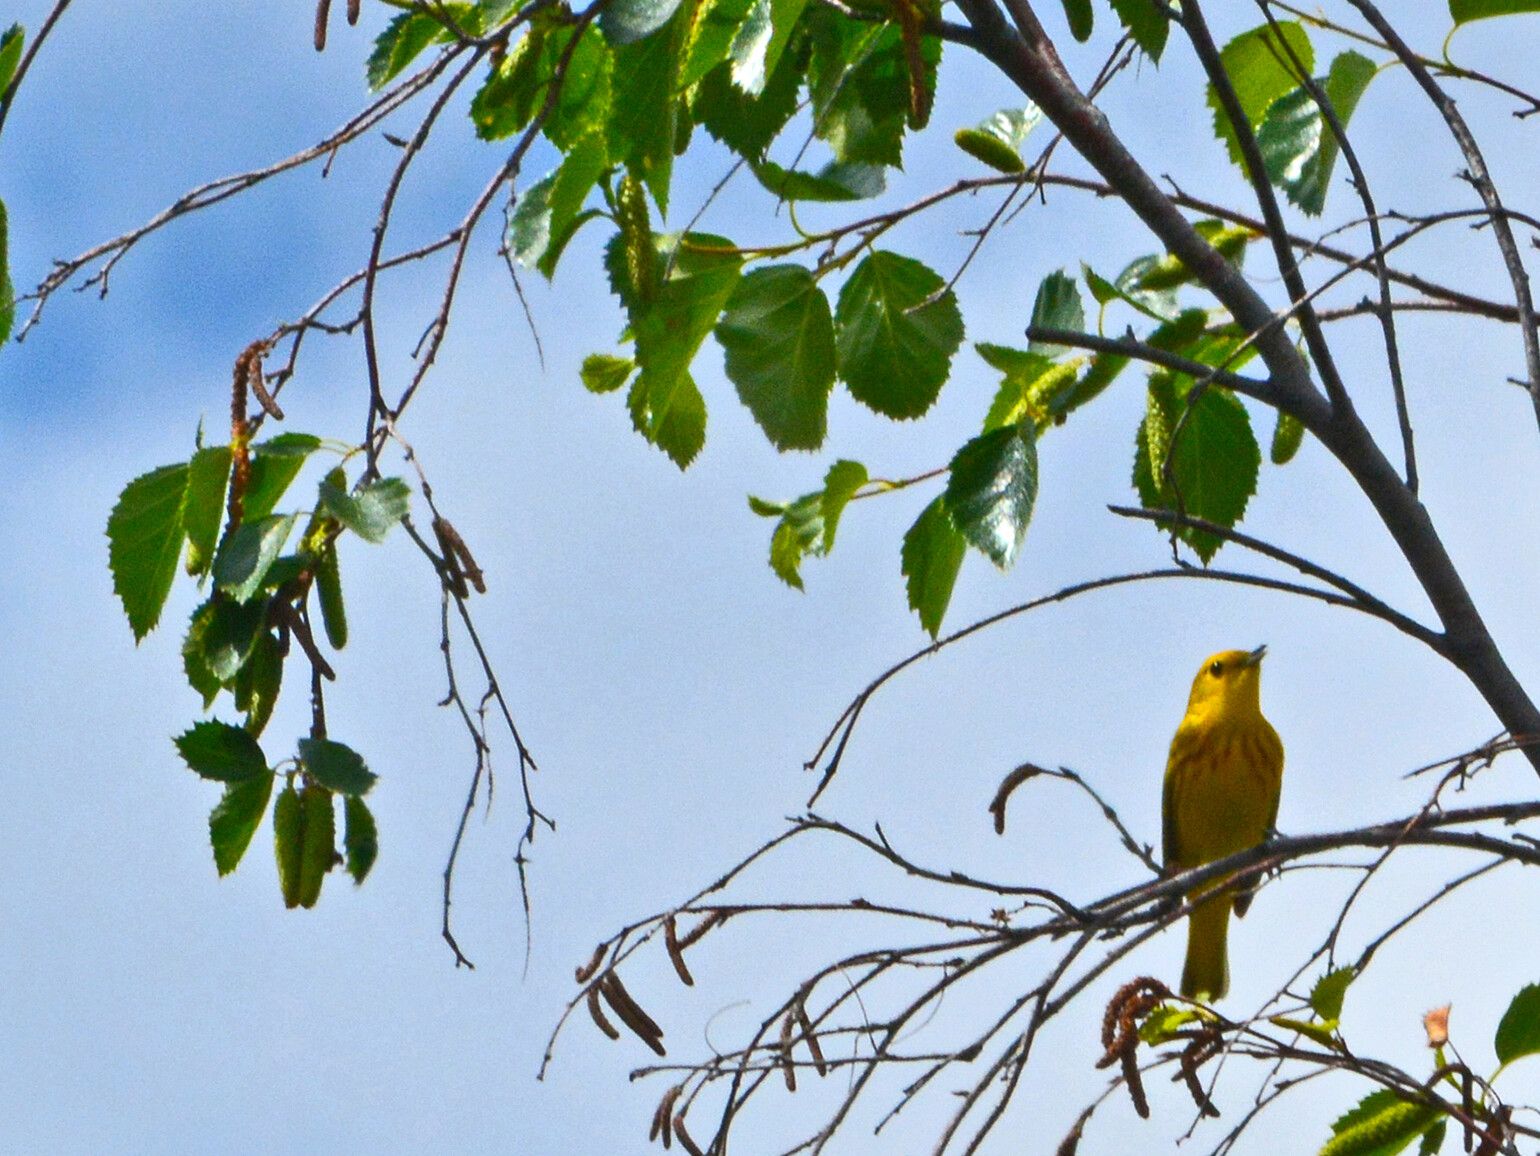 Yellow Warbler is one of the many bird species in Vaseaux Lake Park.